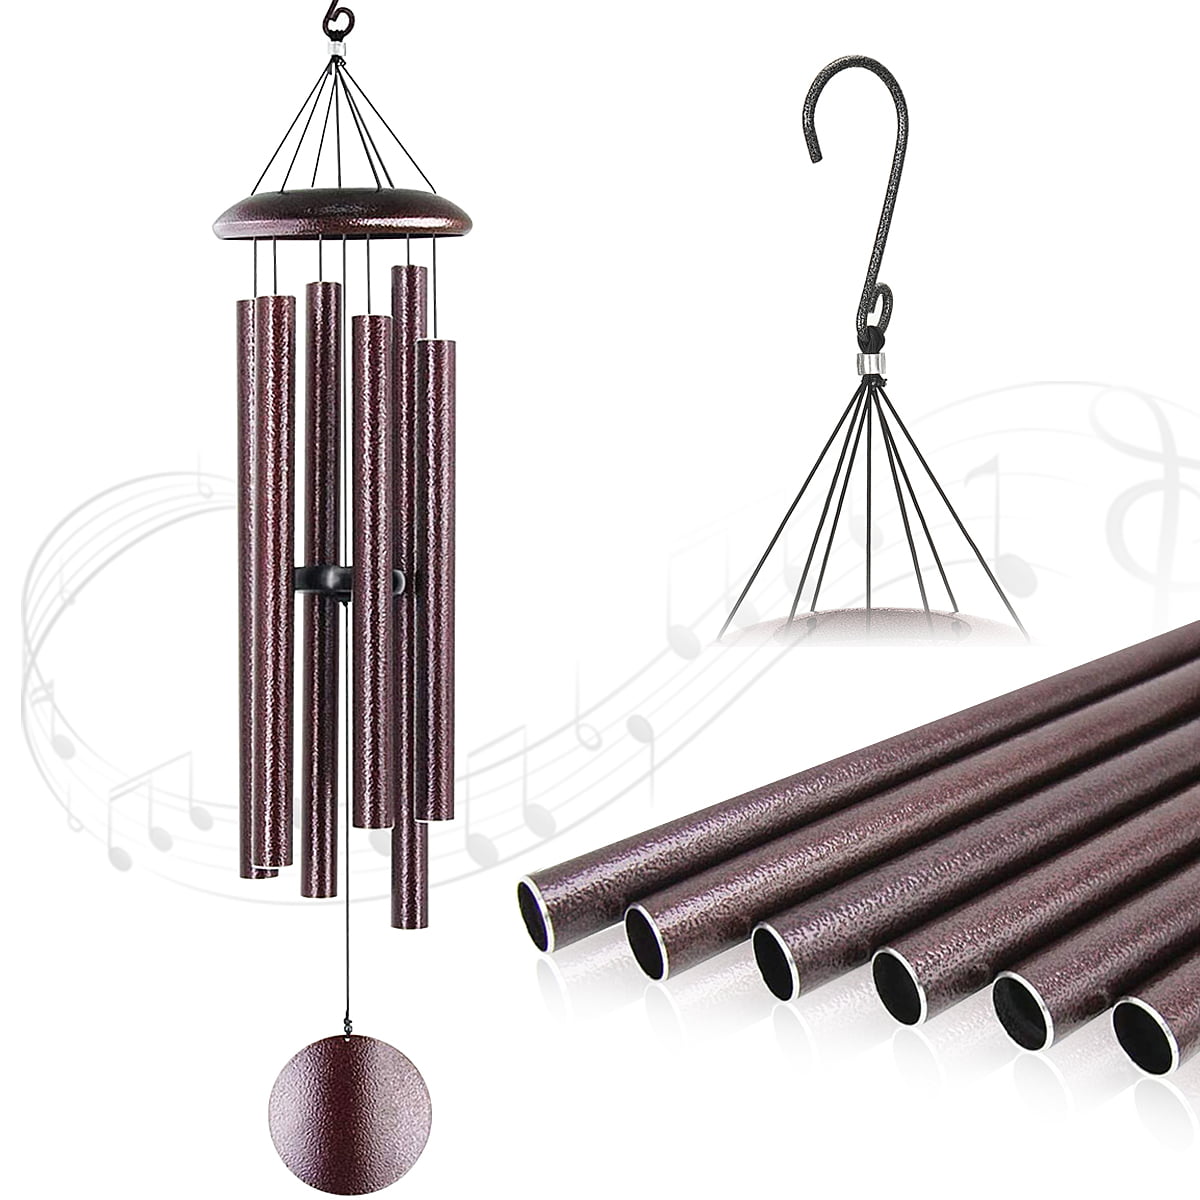 Large Wood Vintage Copper Wind Chime Metal 16 Tubes Anti-rust Garden Wind Chime 